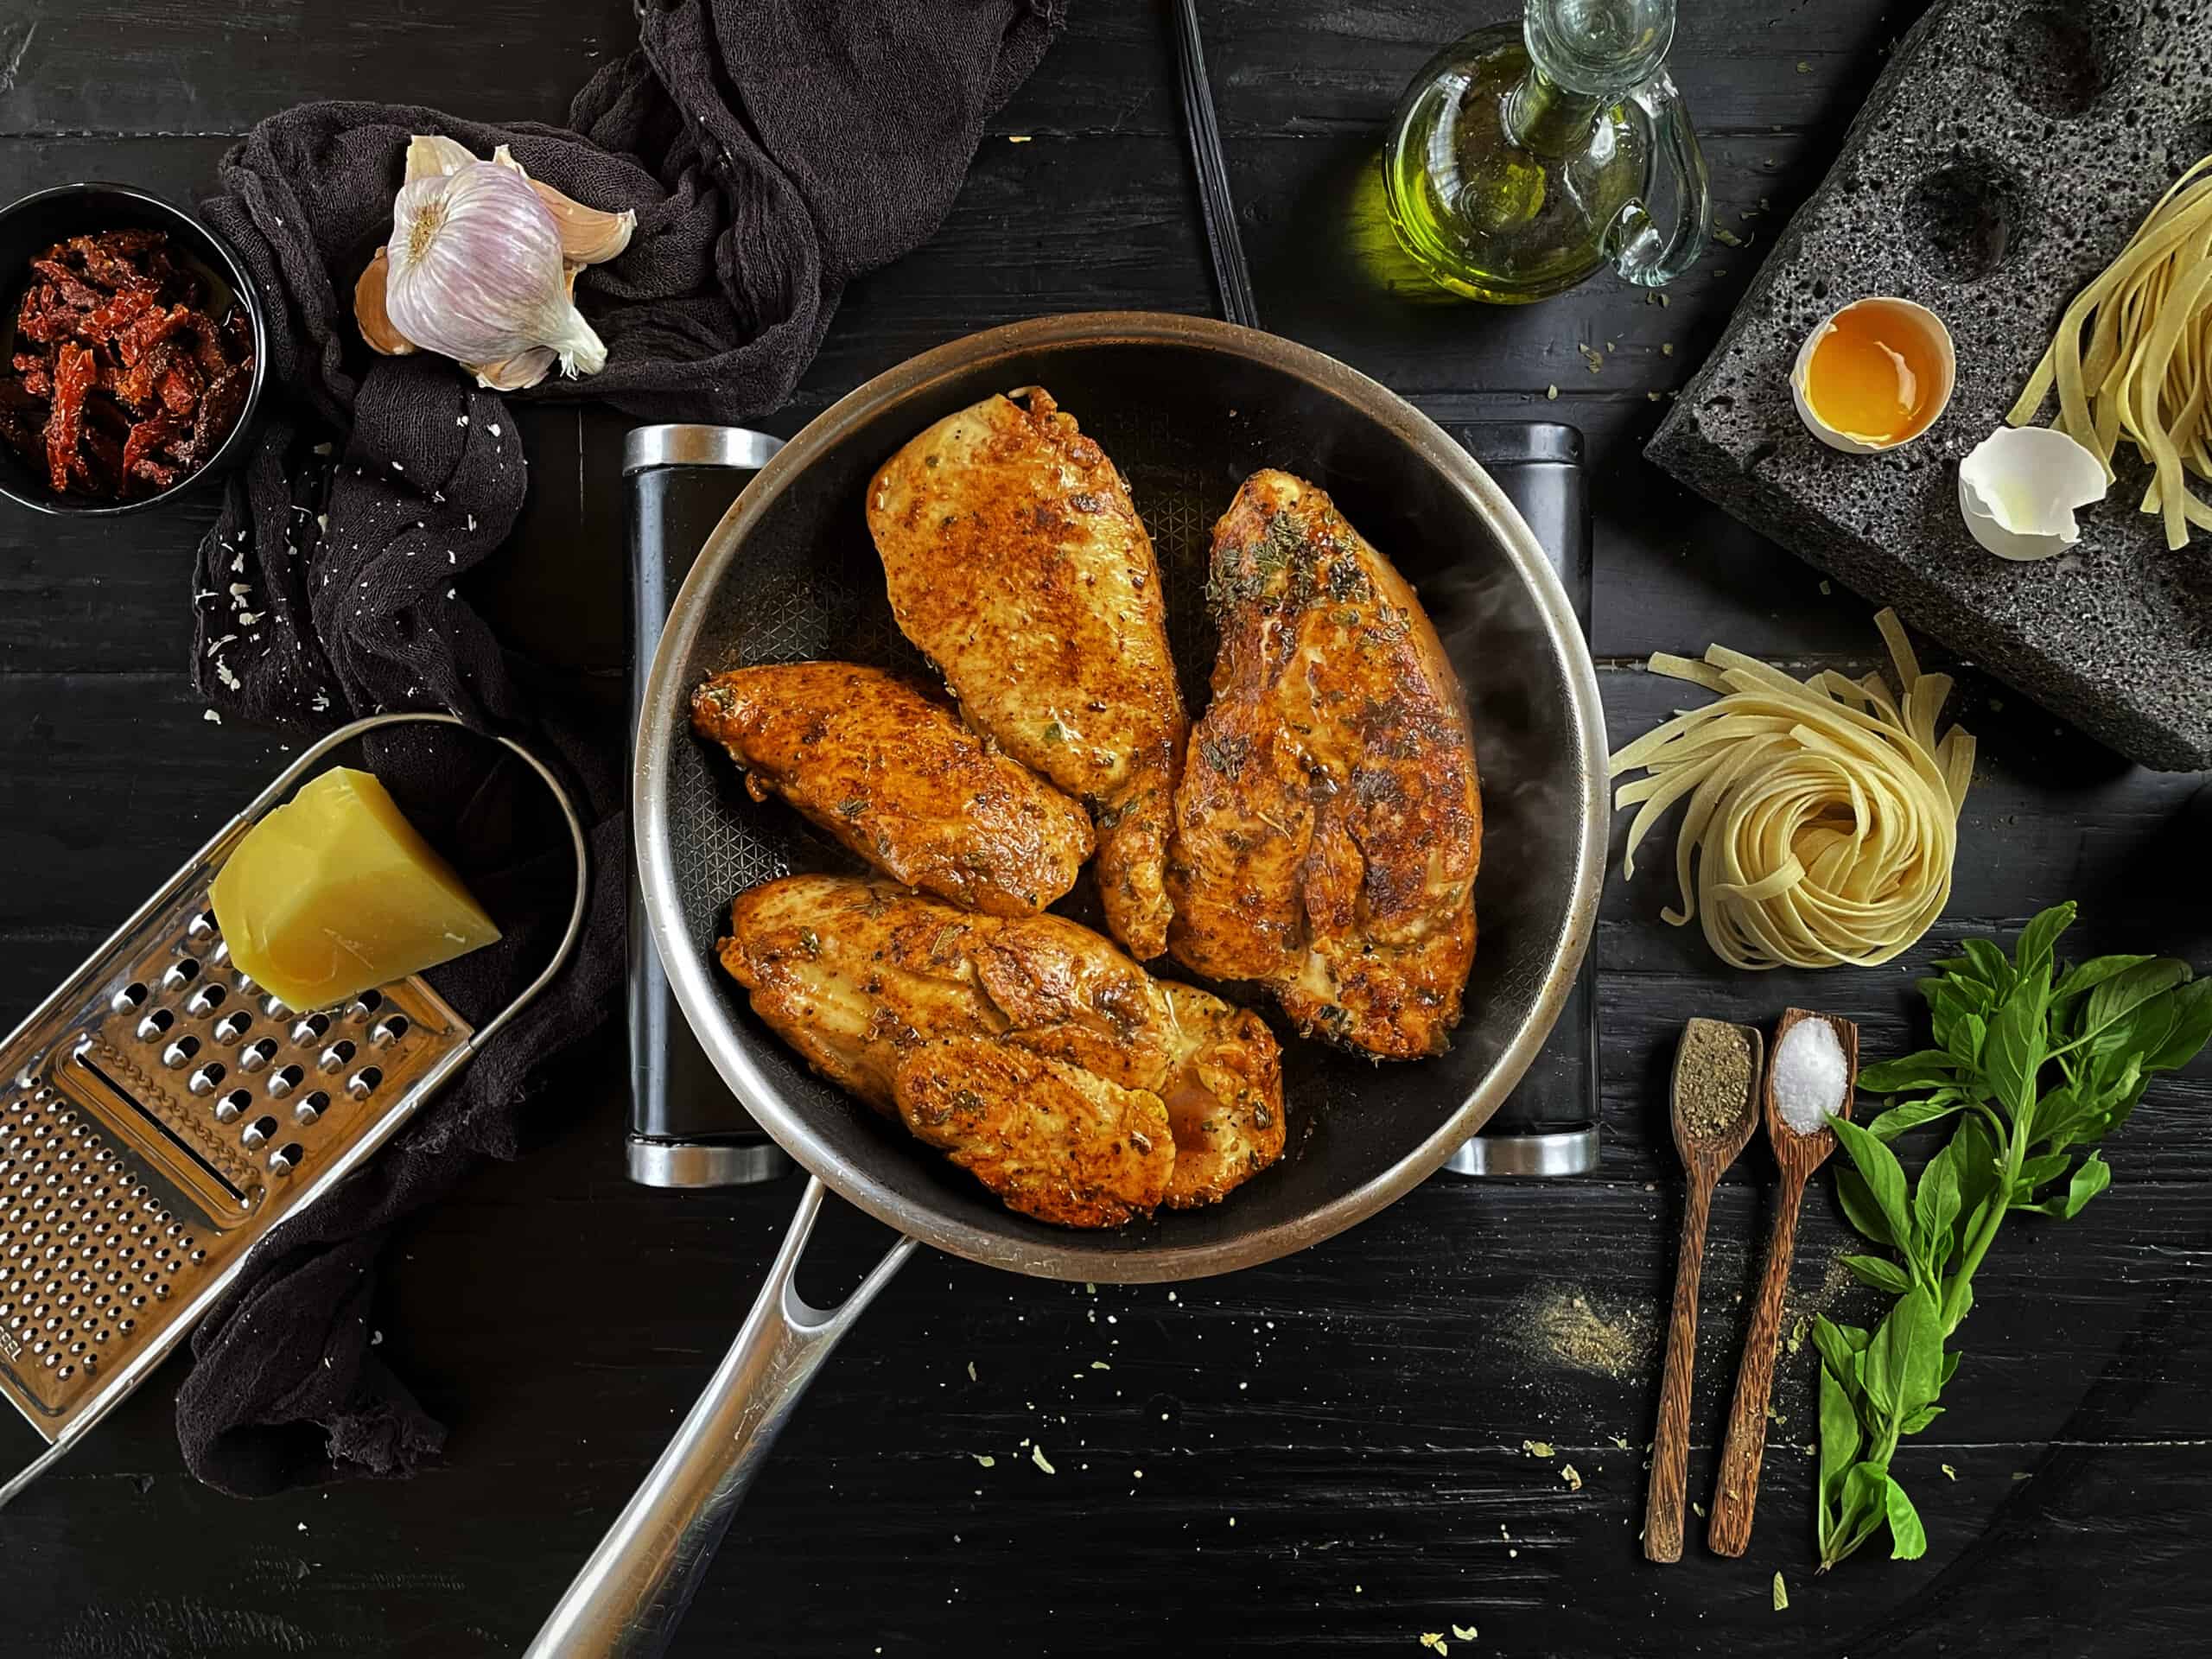 Spiced Chicken breast cooking in a pan